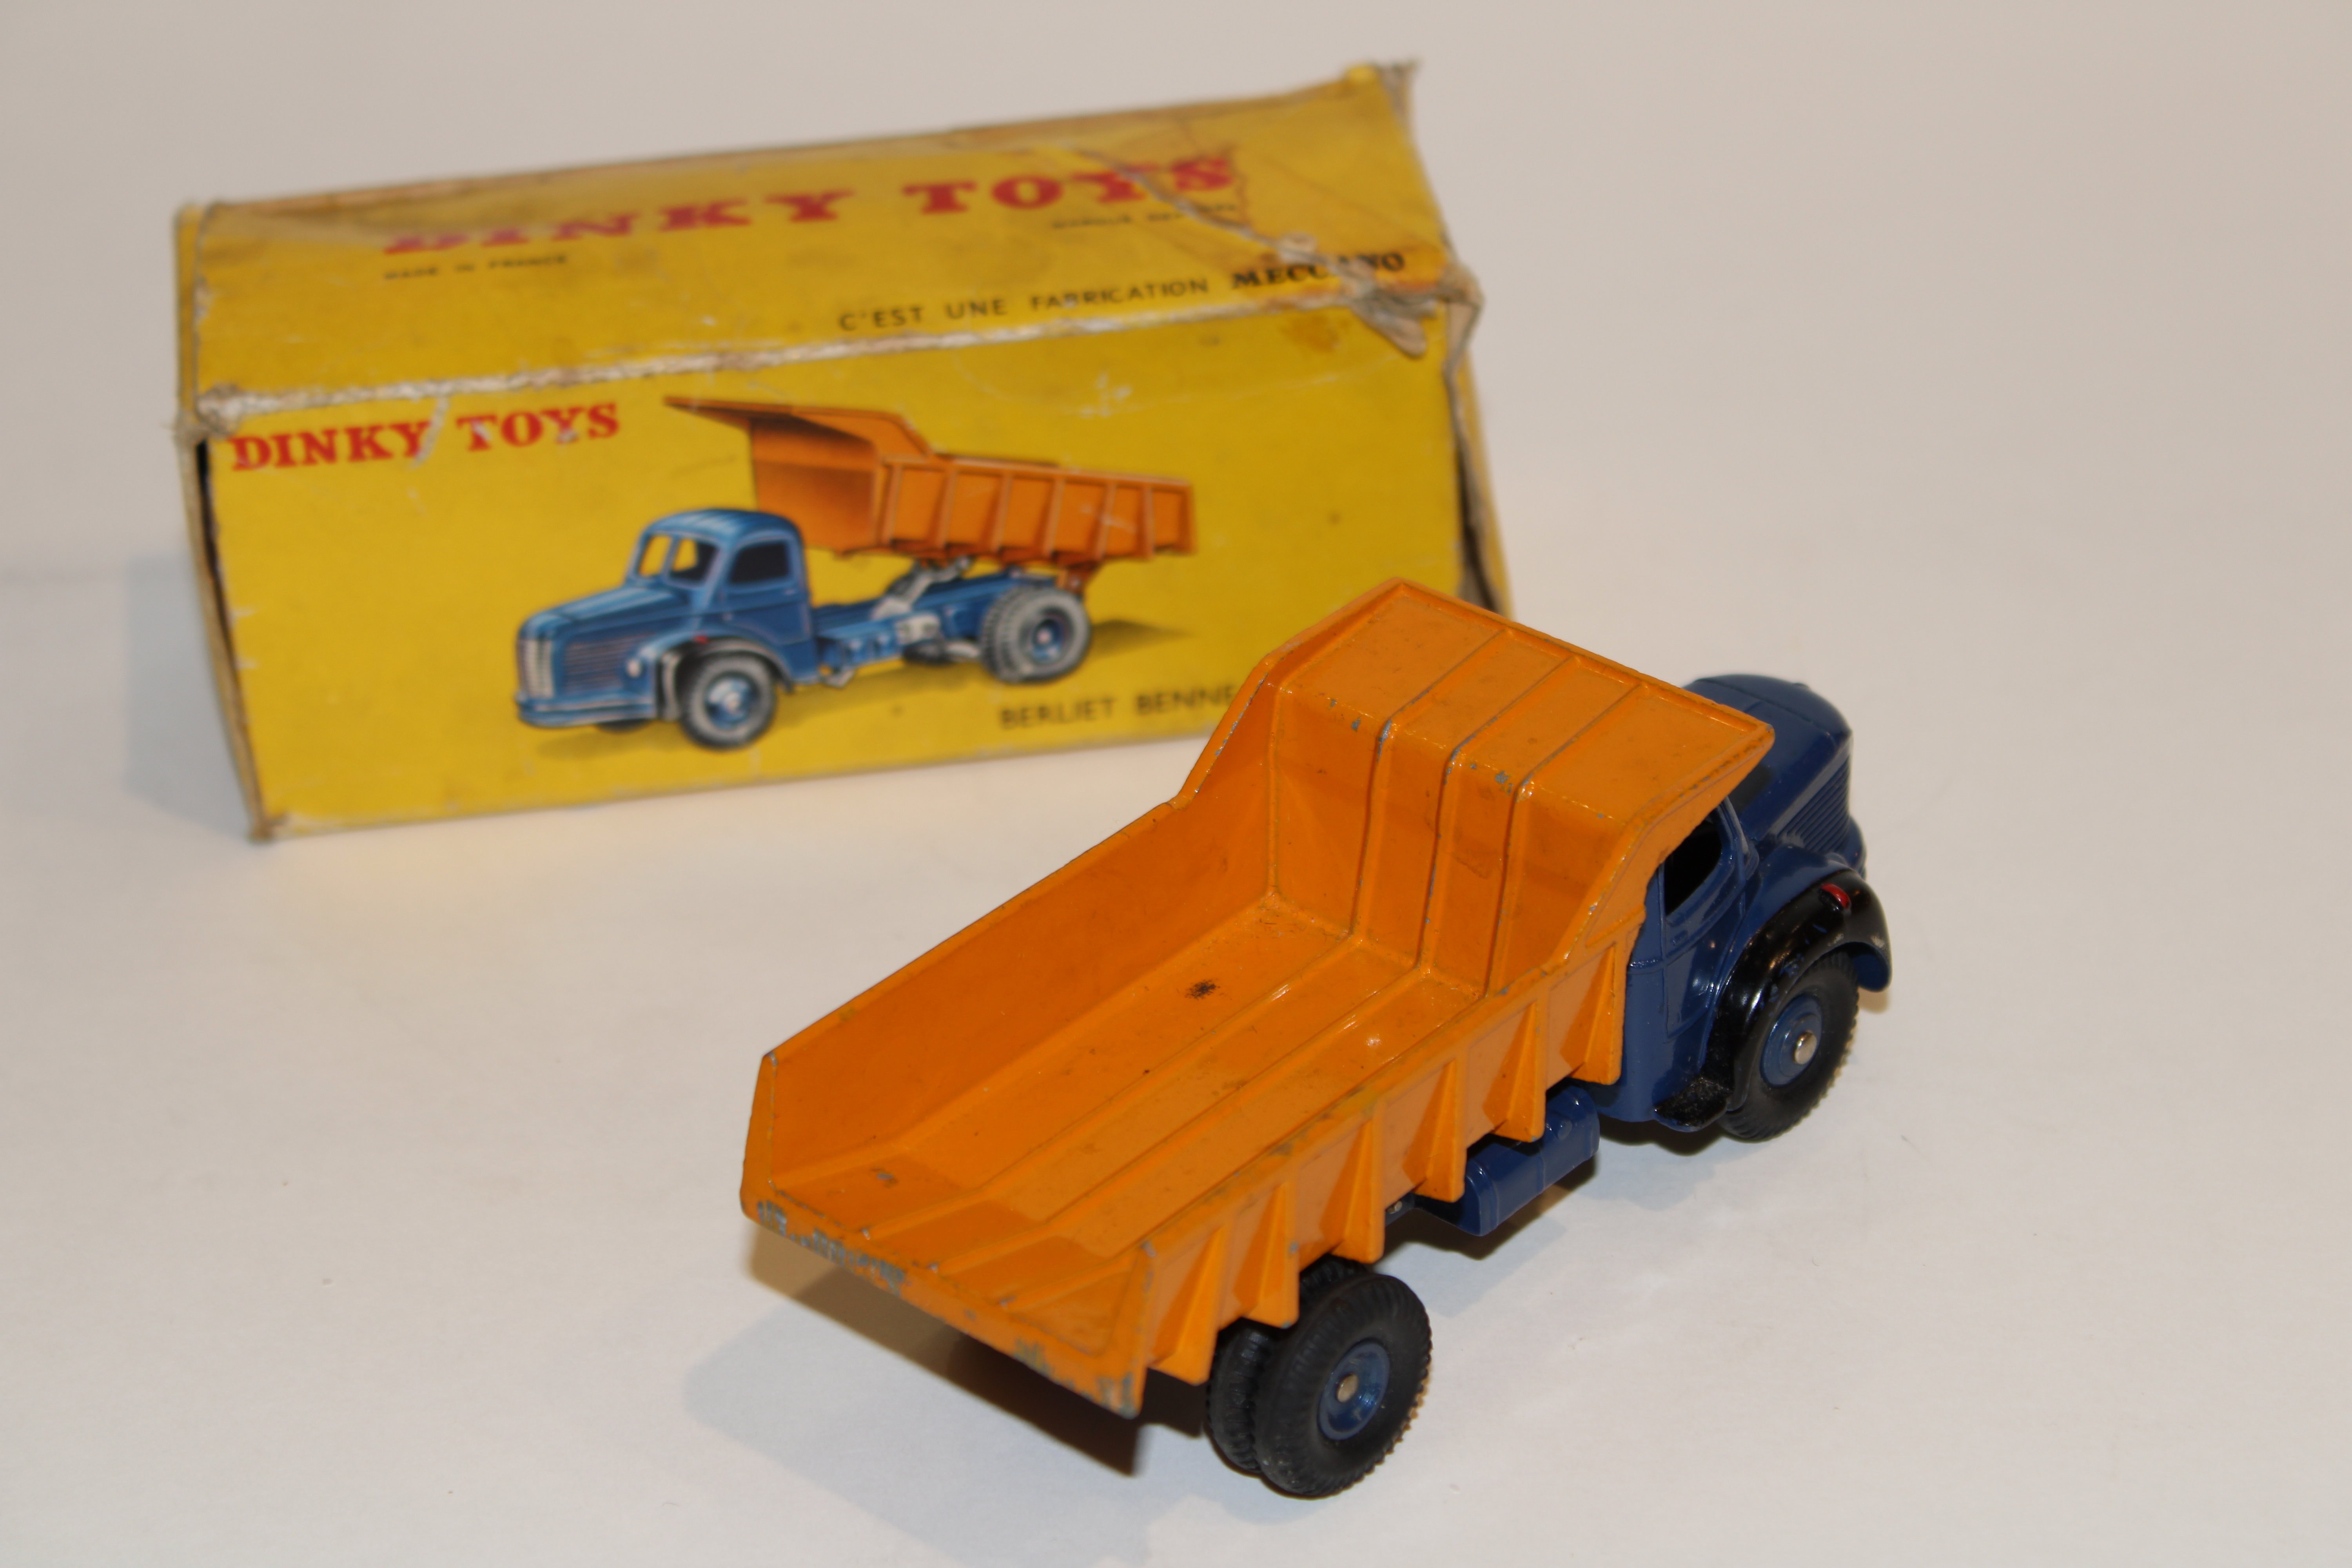 BERLIET BENNE CARRIERES DINKY TOYS 1/43°